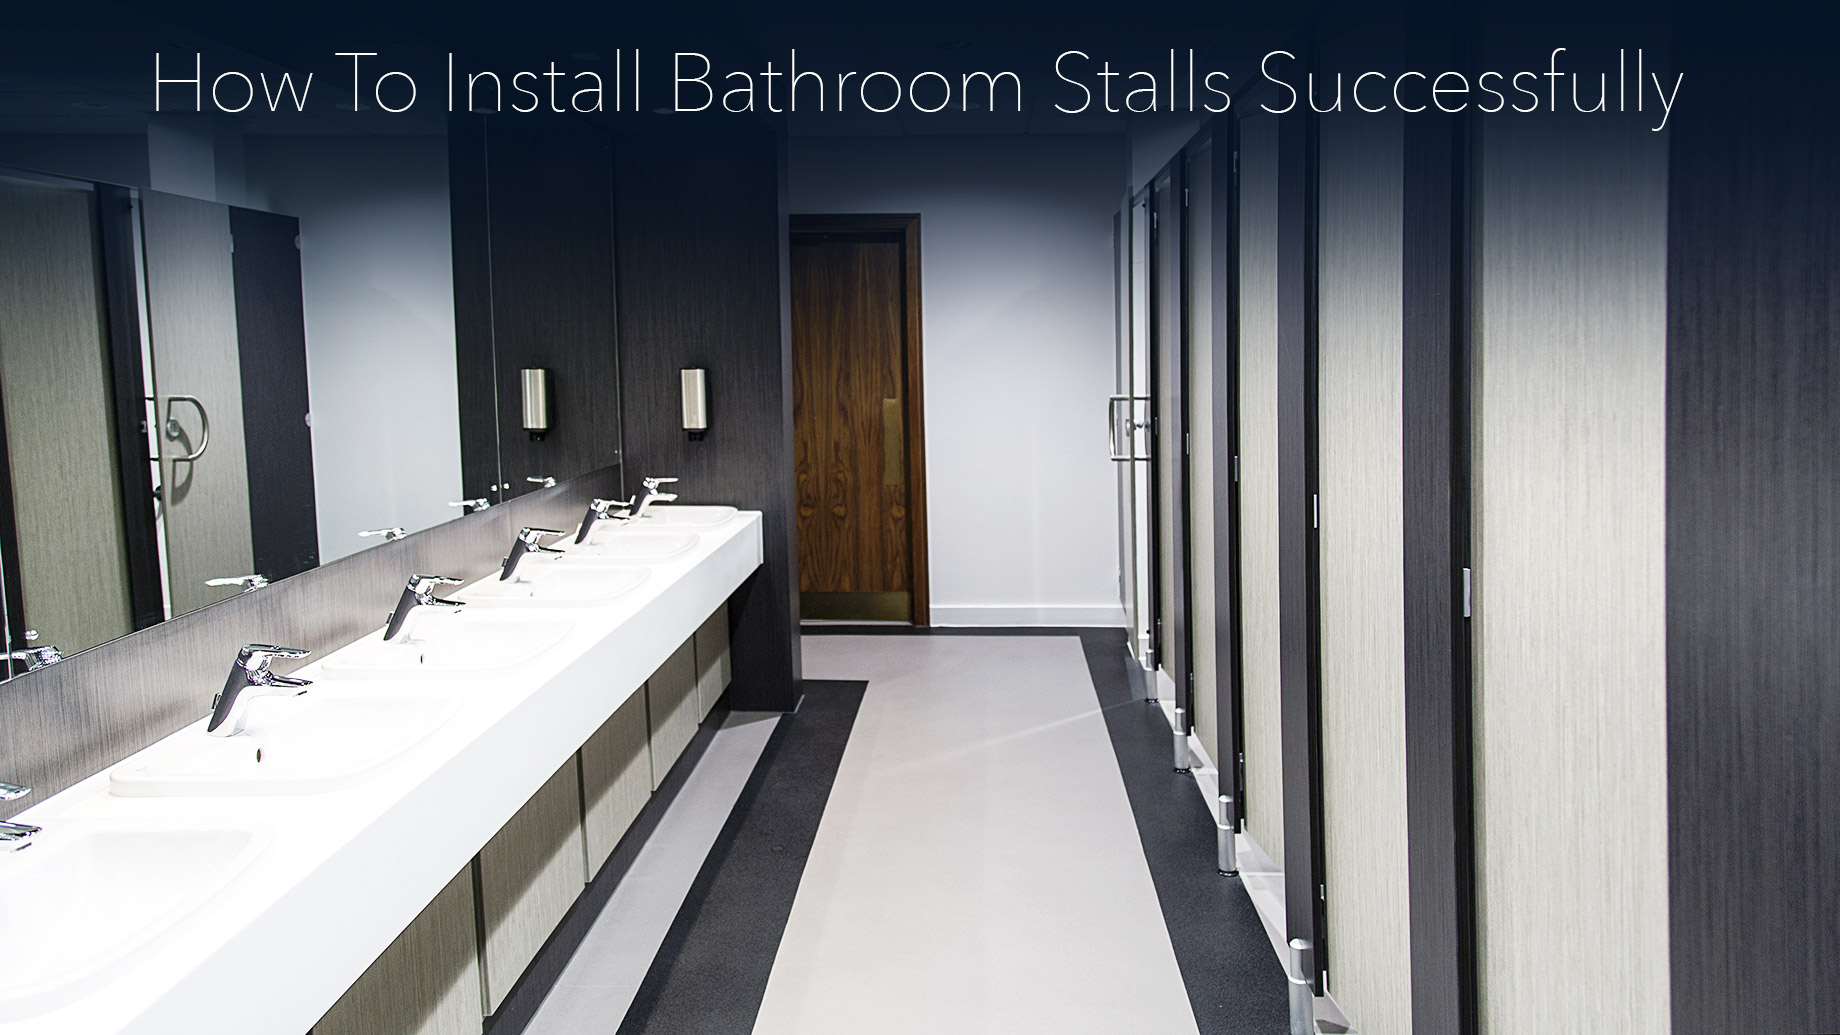 How To Install Bathroom Stalls Successfully